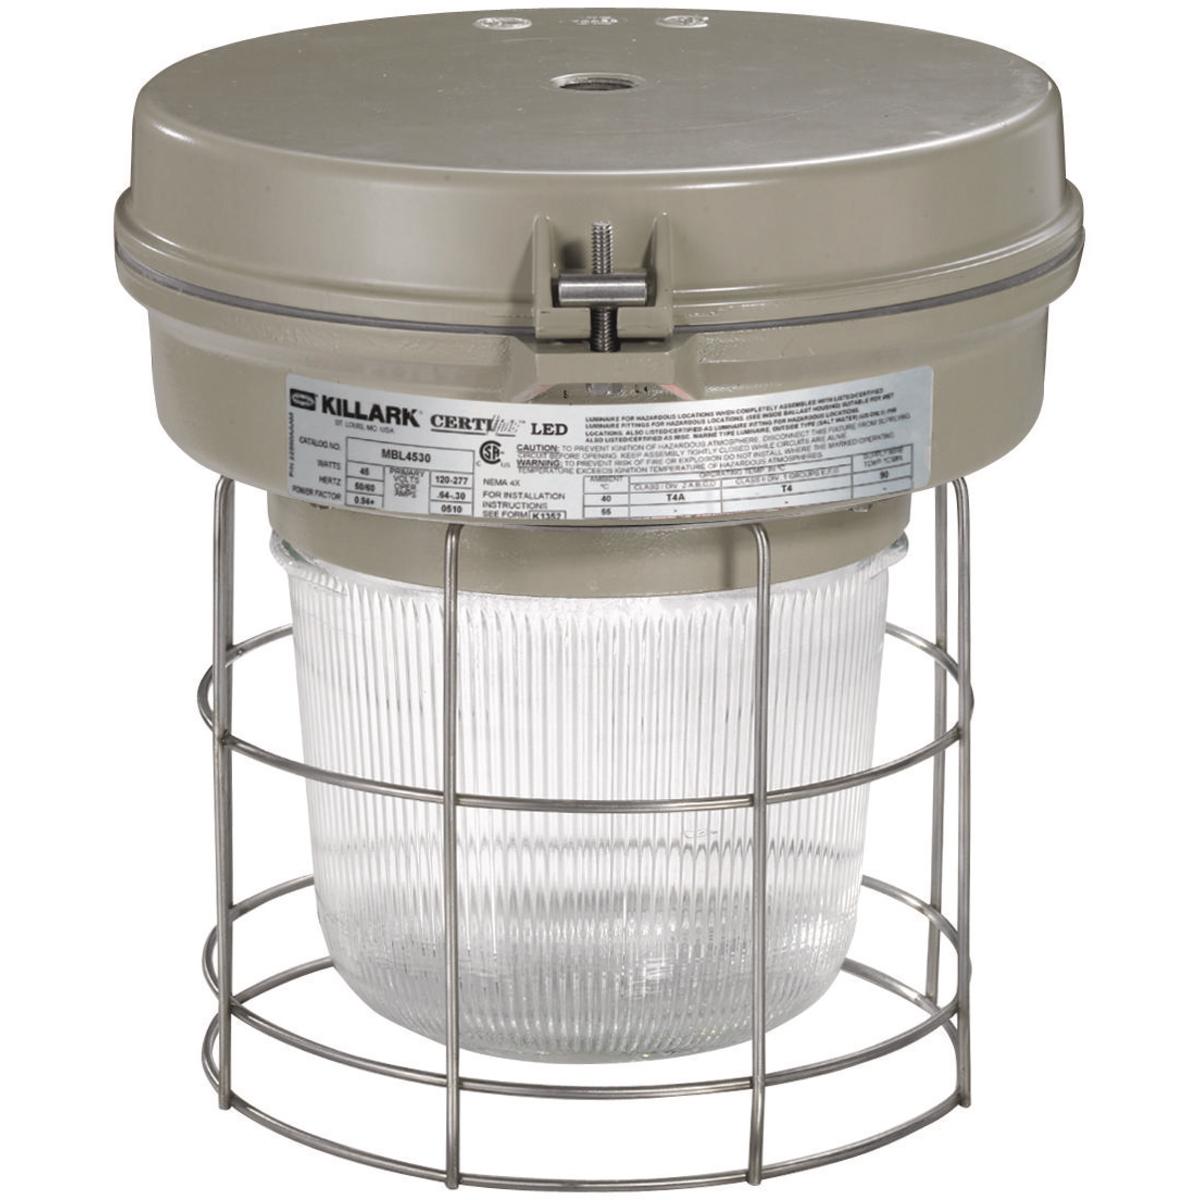 Hubbell VM3P200A2R5G VM3 Series - 200W Metal Halide Quadri-Volt - 3/4" Pendant - Type V Glass Refractor and Guard  ; Ballast tank and splice box – corrosion resistant copper-free aluminum alloy with baked powder epoxy/polyester finish, electrostatically applied for complete, 